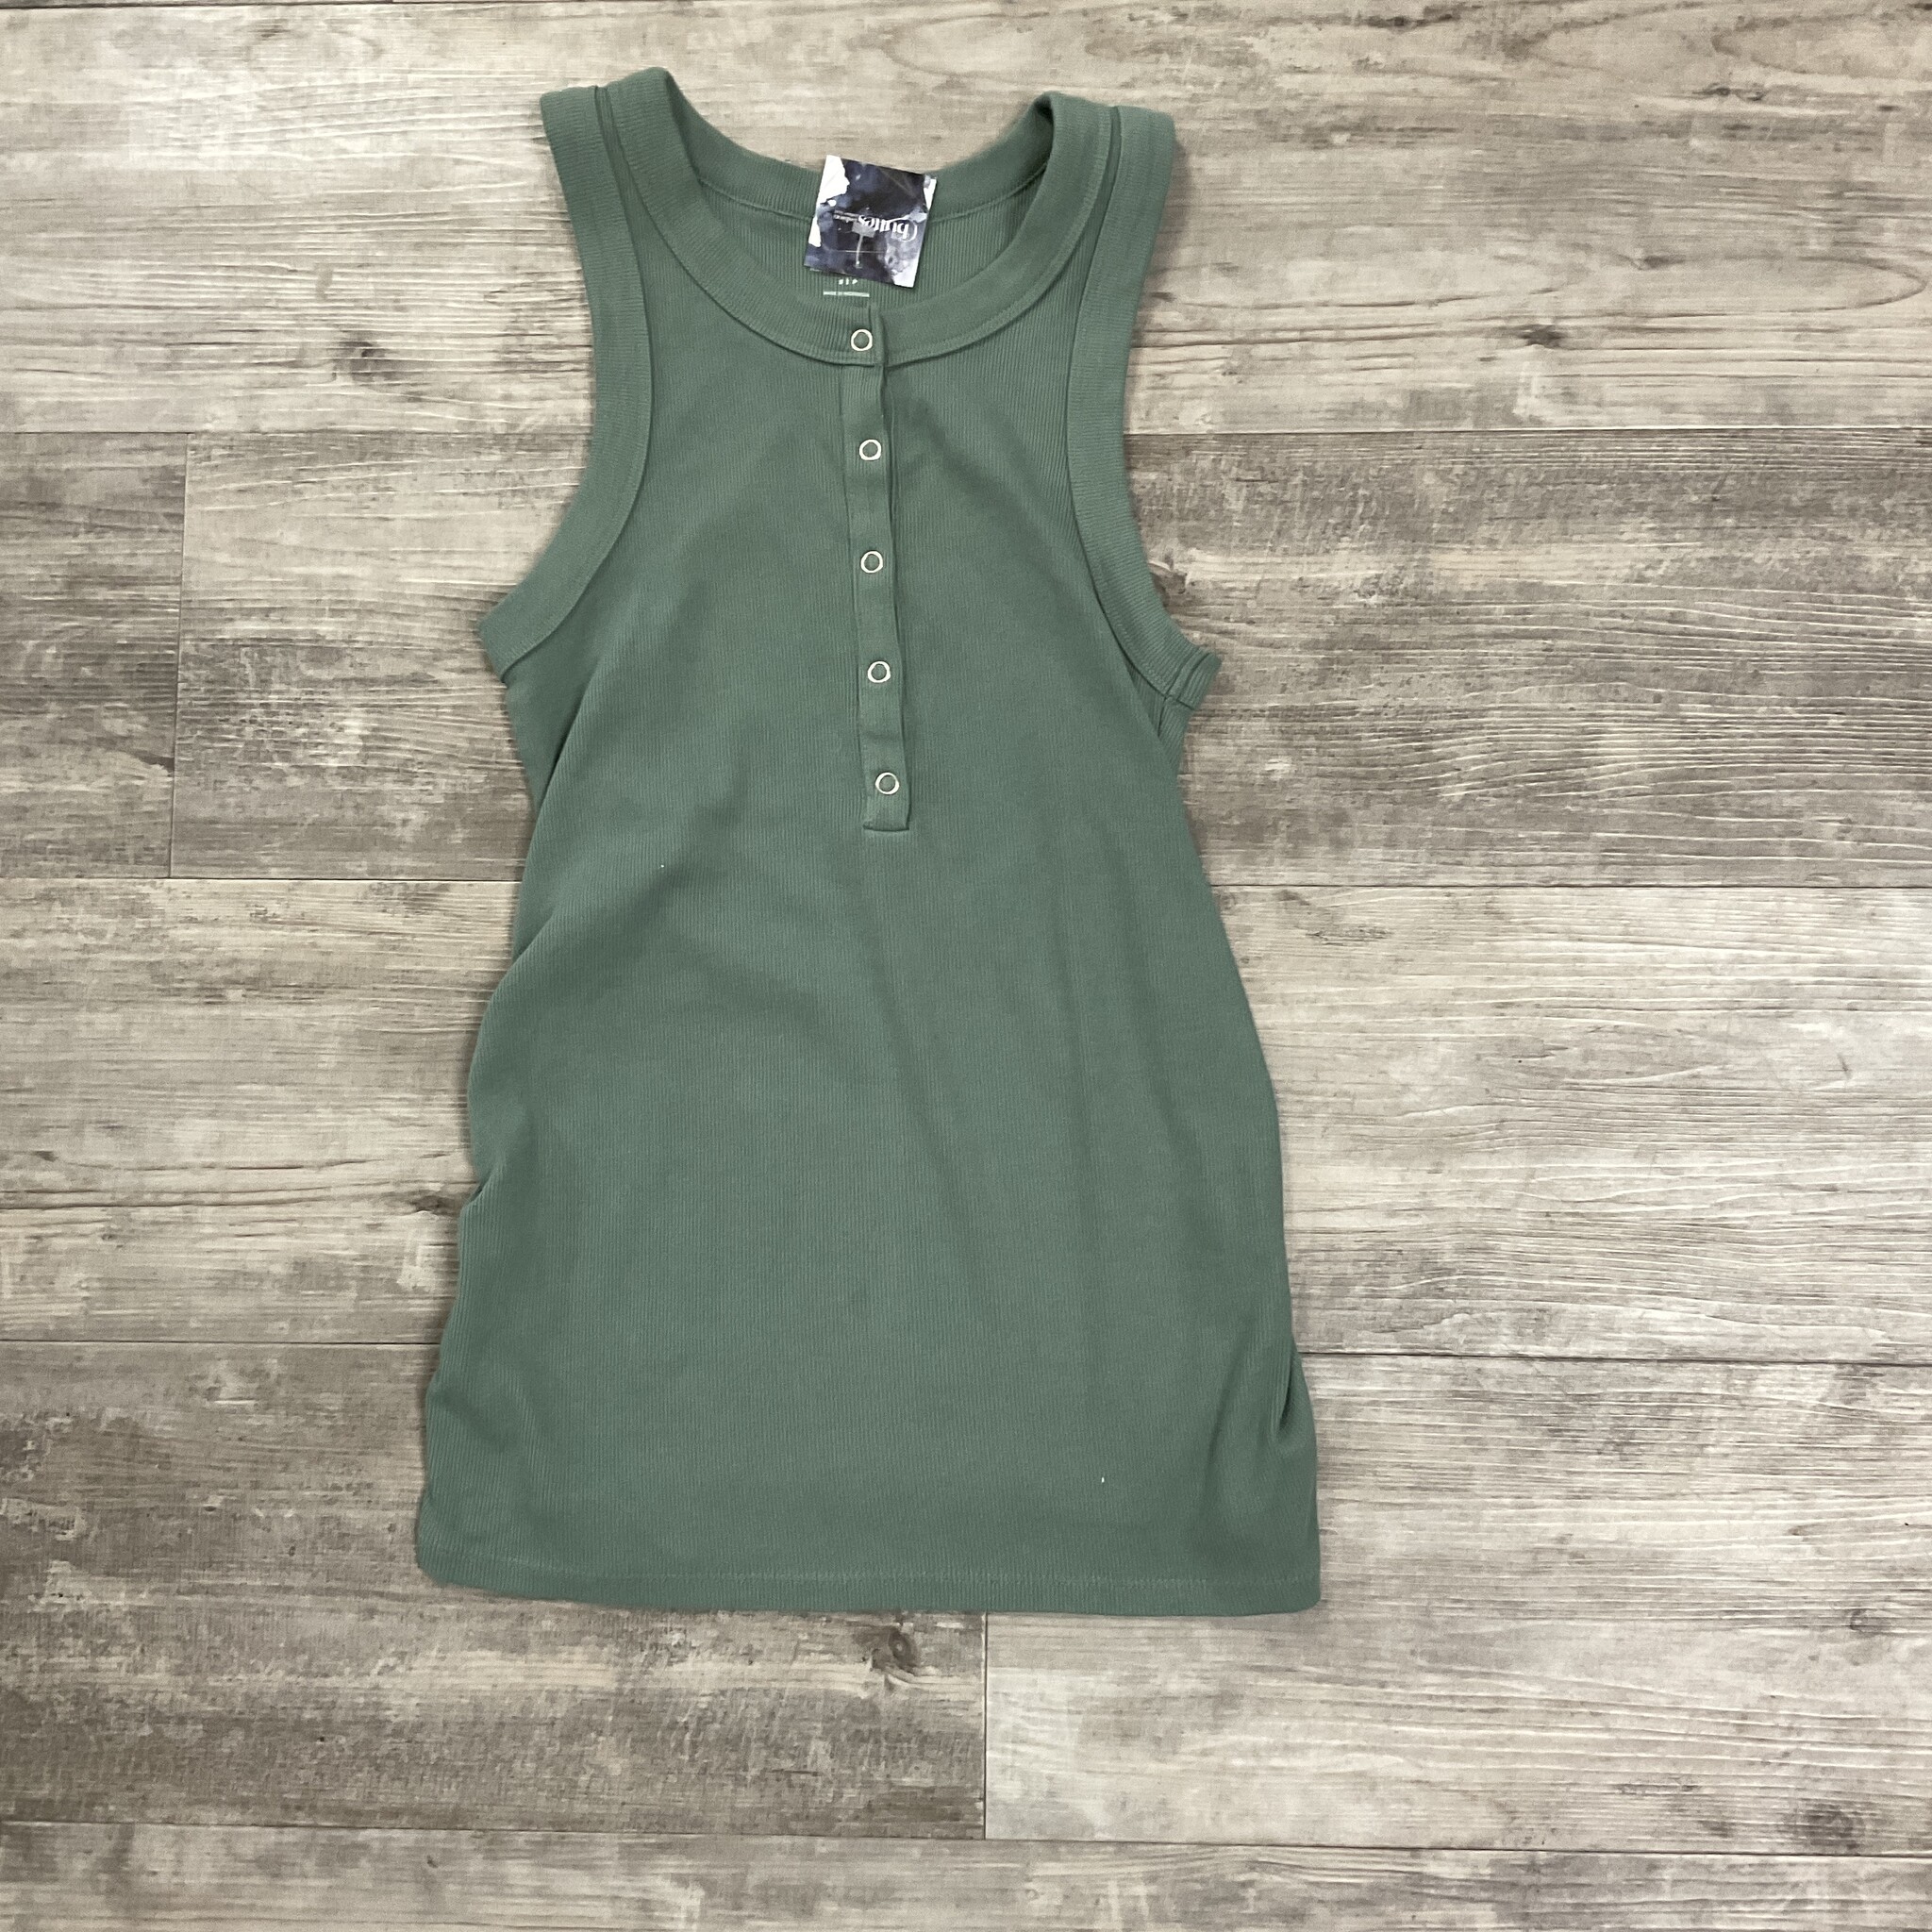 Maternity Green Ribbed Tank Top with Buttons - Size S